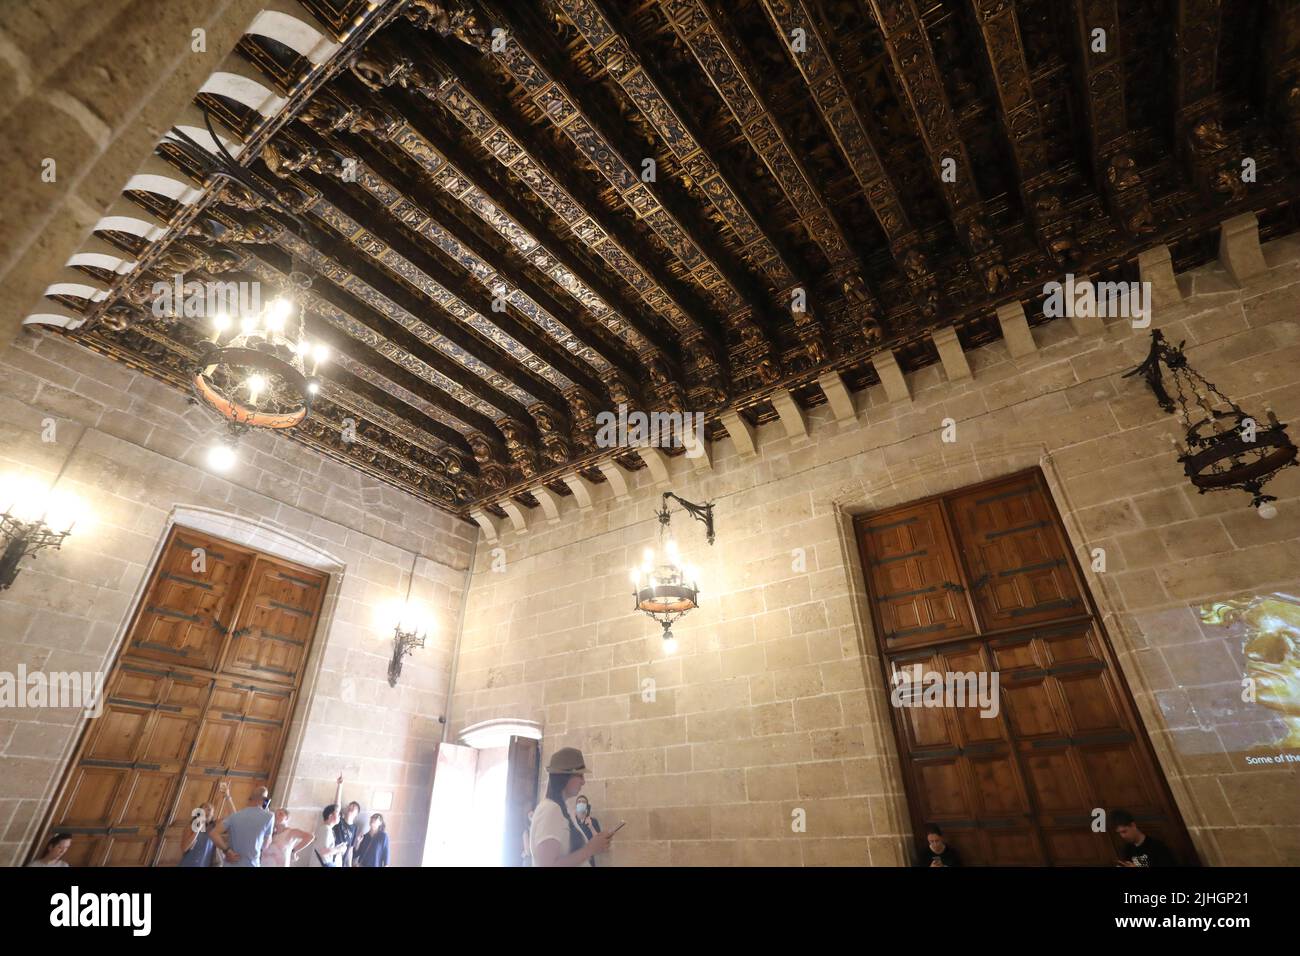 The Silk Exchange or La Lonja de La Seda, a late Valencian Gothic style civic building  and a UNESCO world heritage site, in Spain, Europe Stock Photo